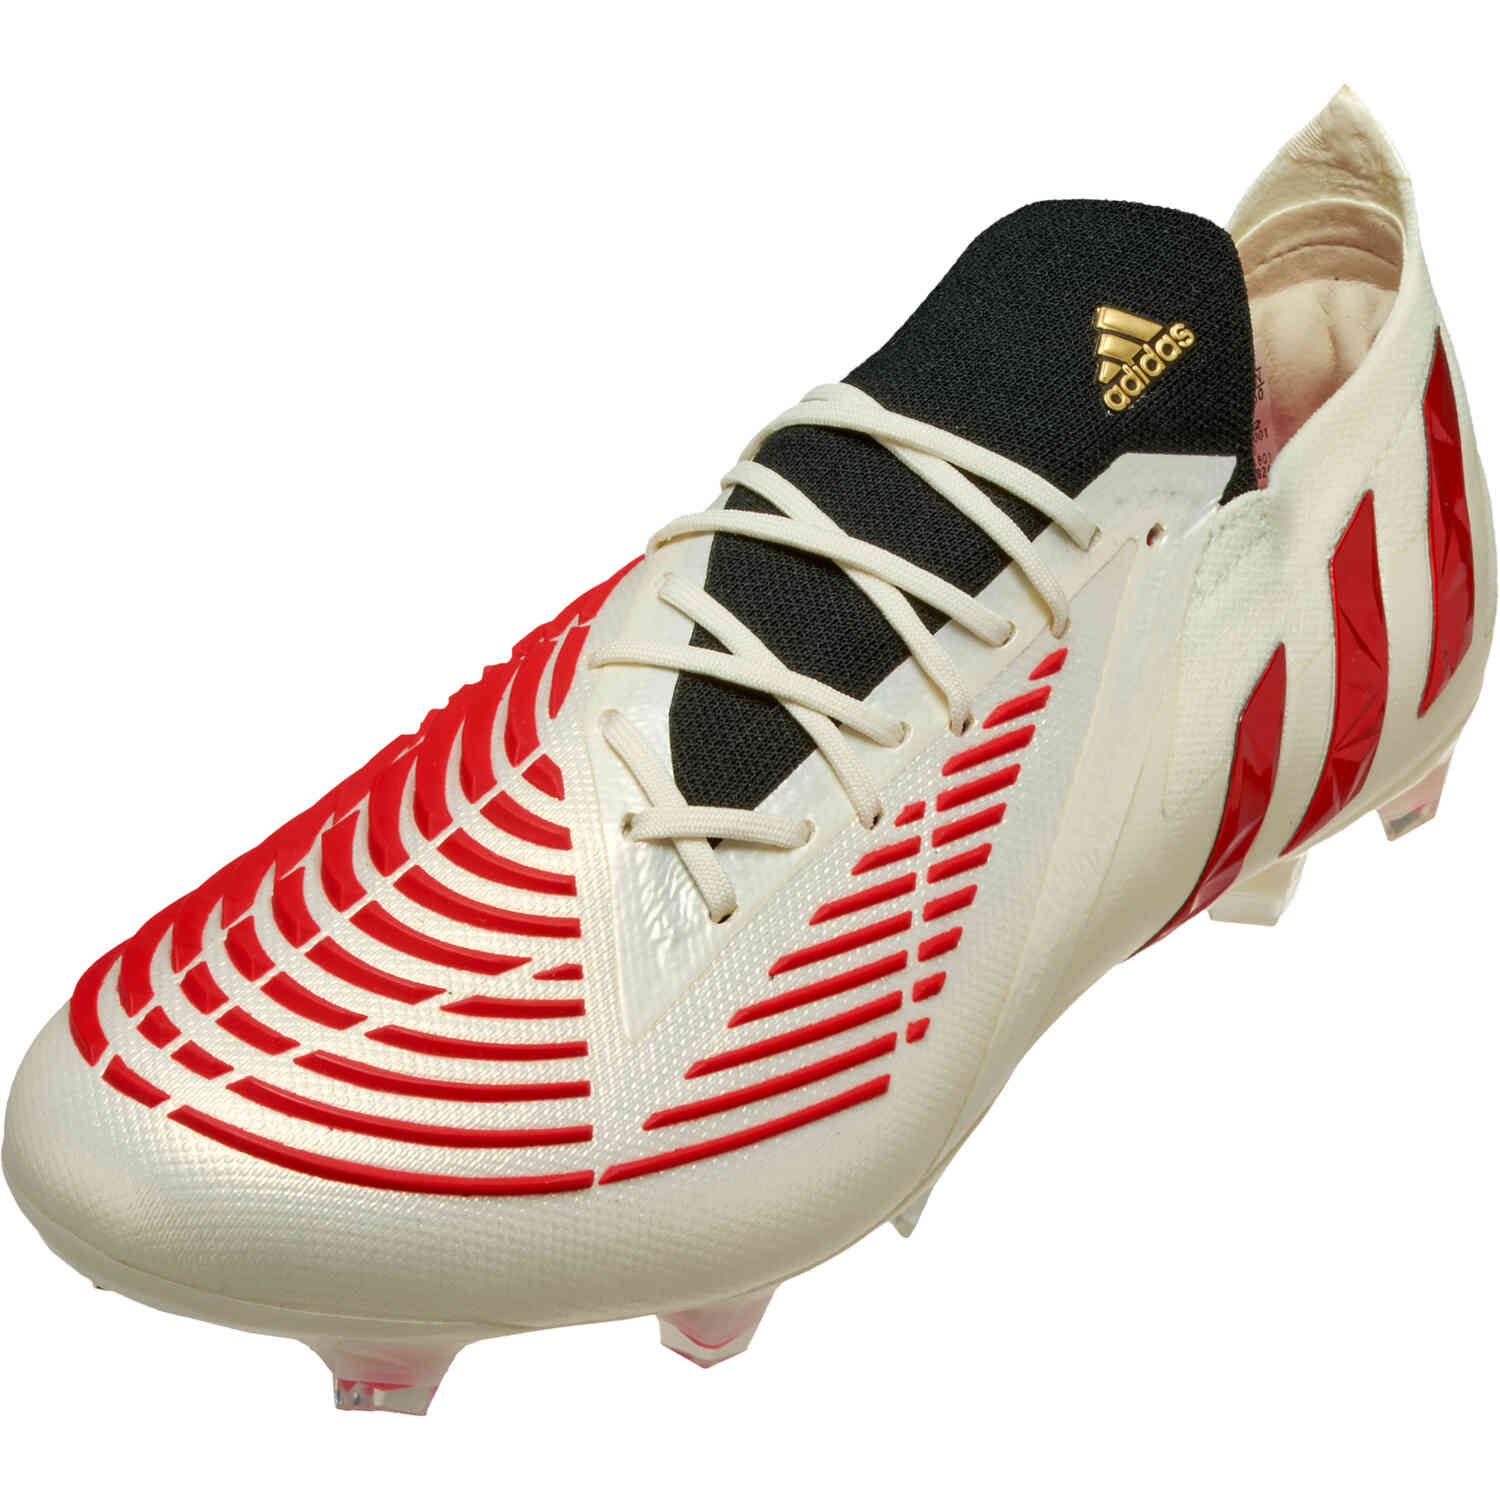 Verzorger coupon timmerman adidas Low Cut Predator Edge.1 FG Firm Ground Soccer Cleats - Showdown Pack  - Soccer Master